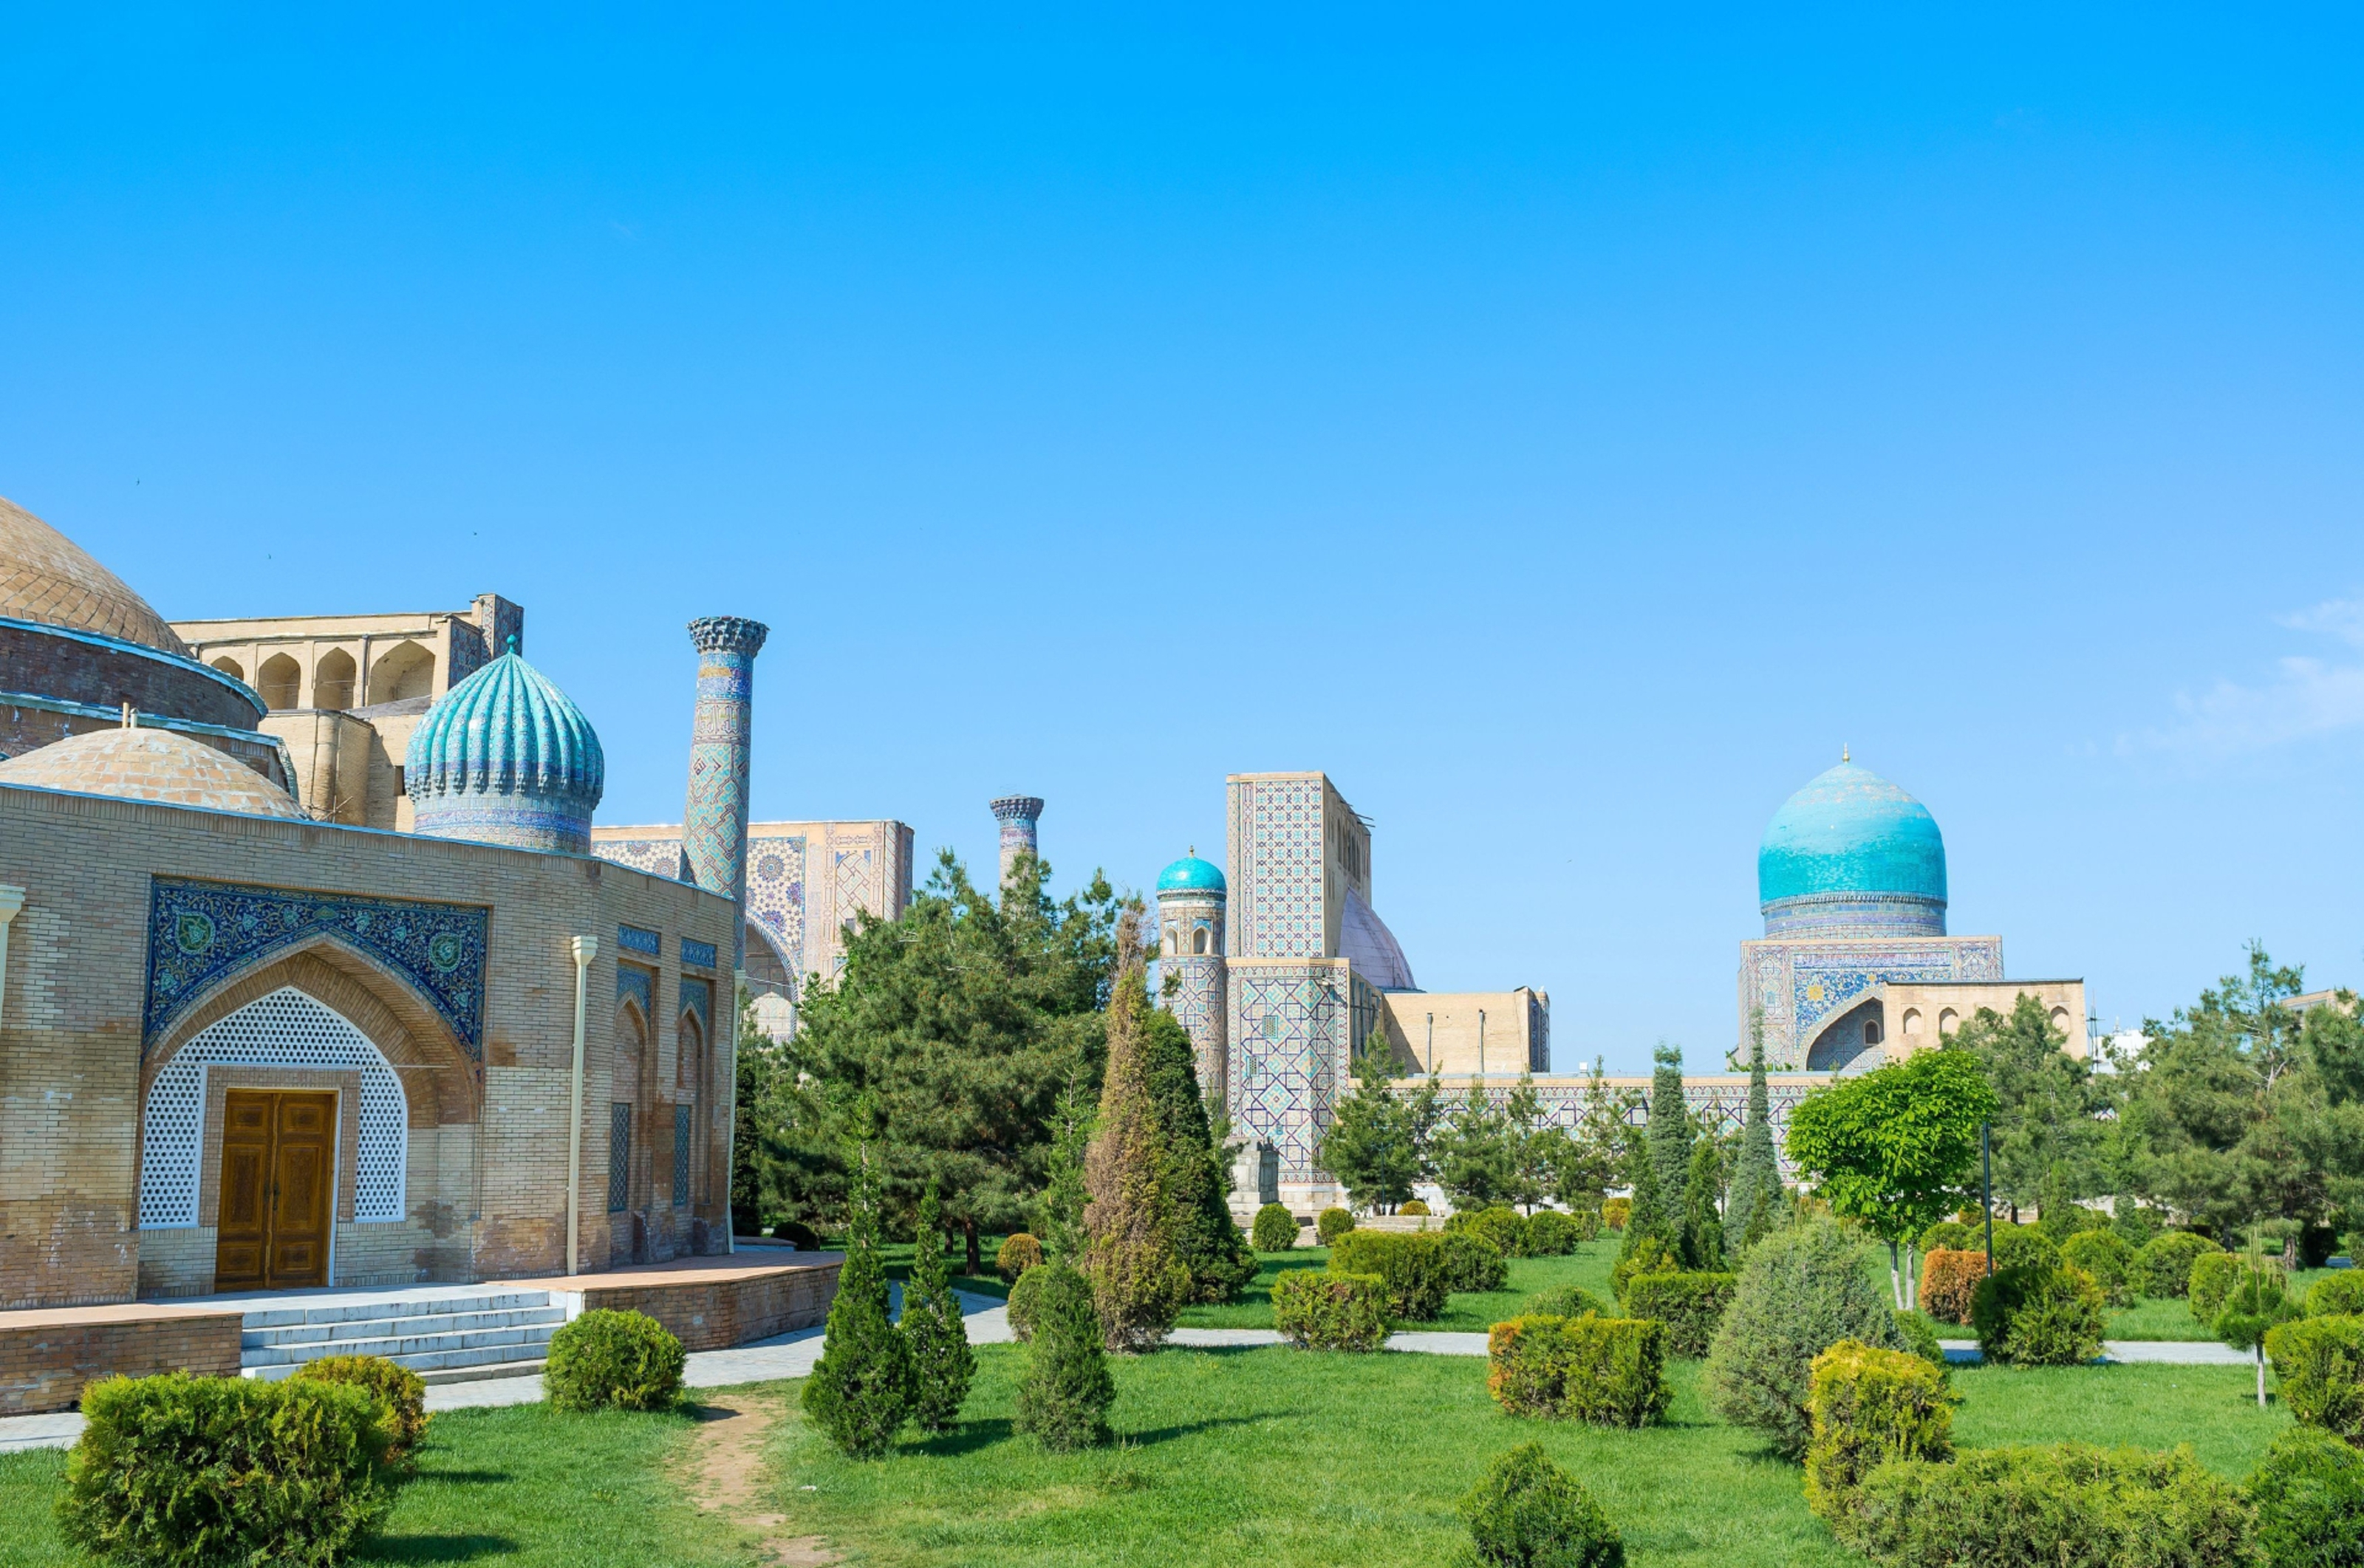 The old square of Registan and Chorsu trading dome surrounded by the lush garden, Samarkand, Uzbekistan.